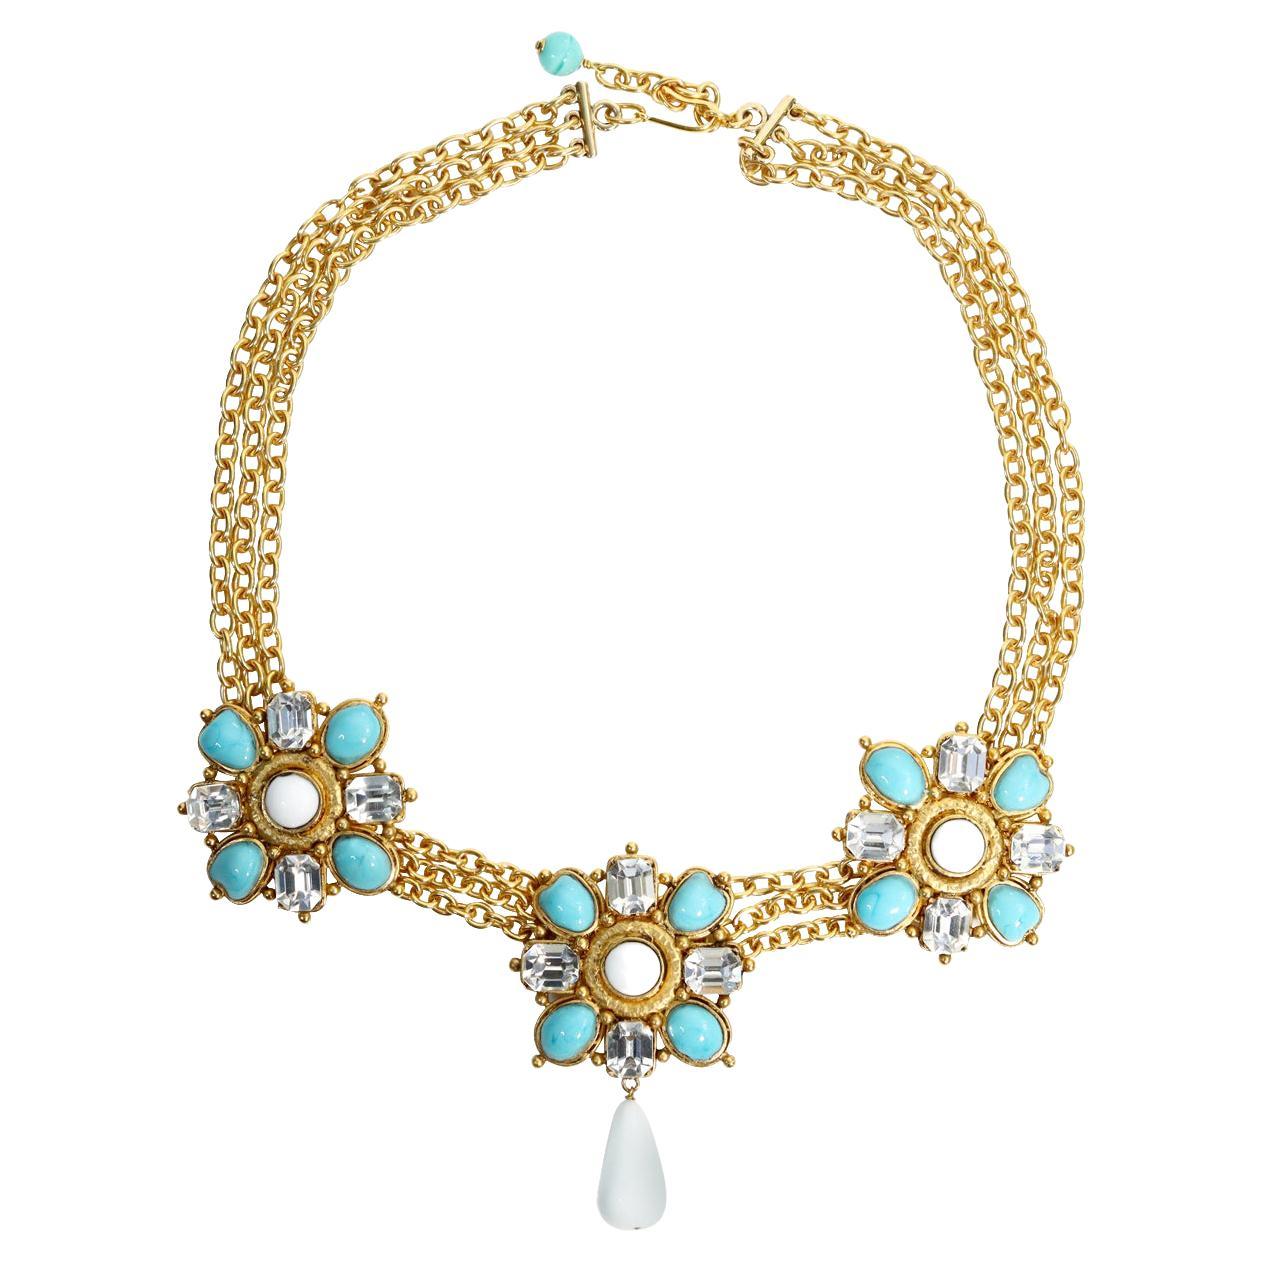 Vintage Maison Gripoix White, Crystal and Faux Turquoise on Gold Chain Necklace